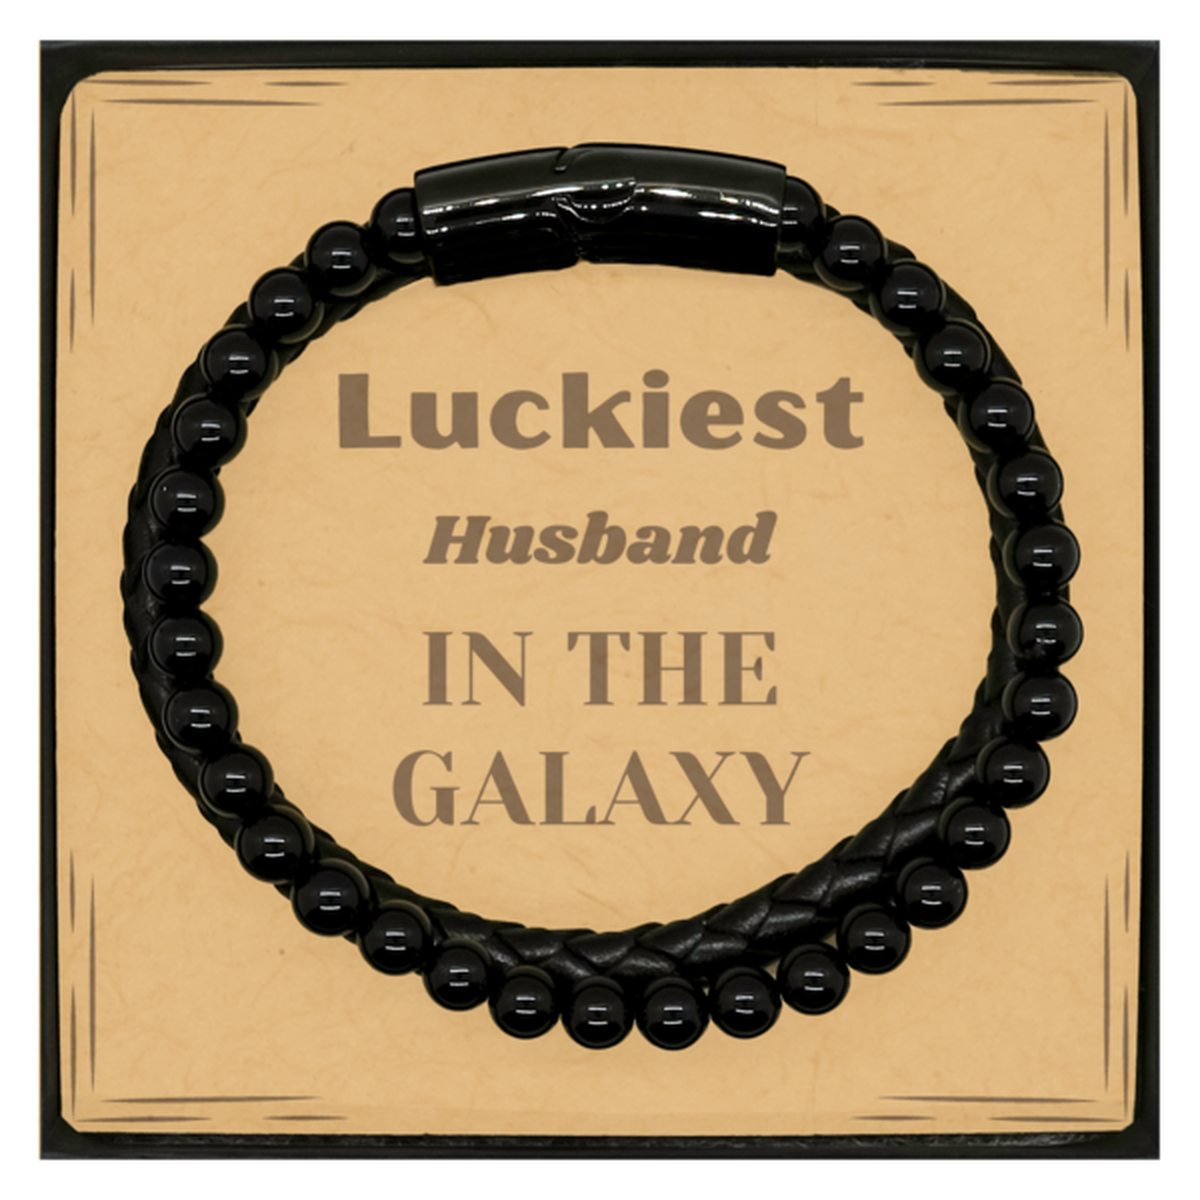 Luckiest Husband in the Galaxy, To My Husband Message Card Gifts, Christmas Husband Stone Leather Bracelets Gifts, X-mas Birthday Unique Gifts For Husband Men Women